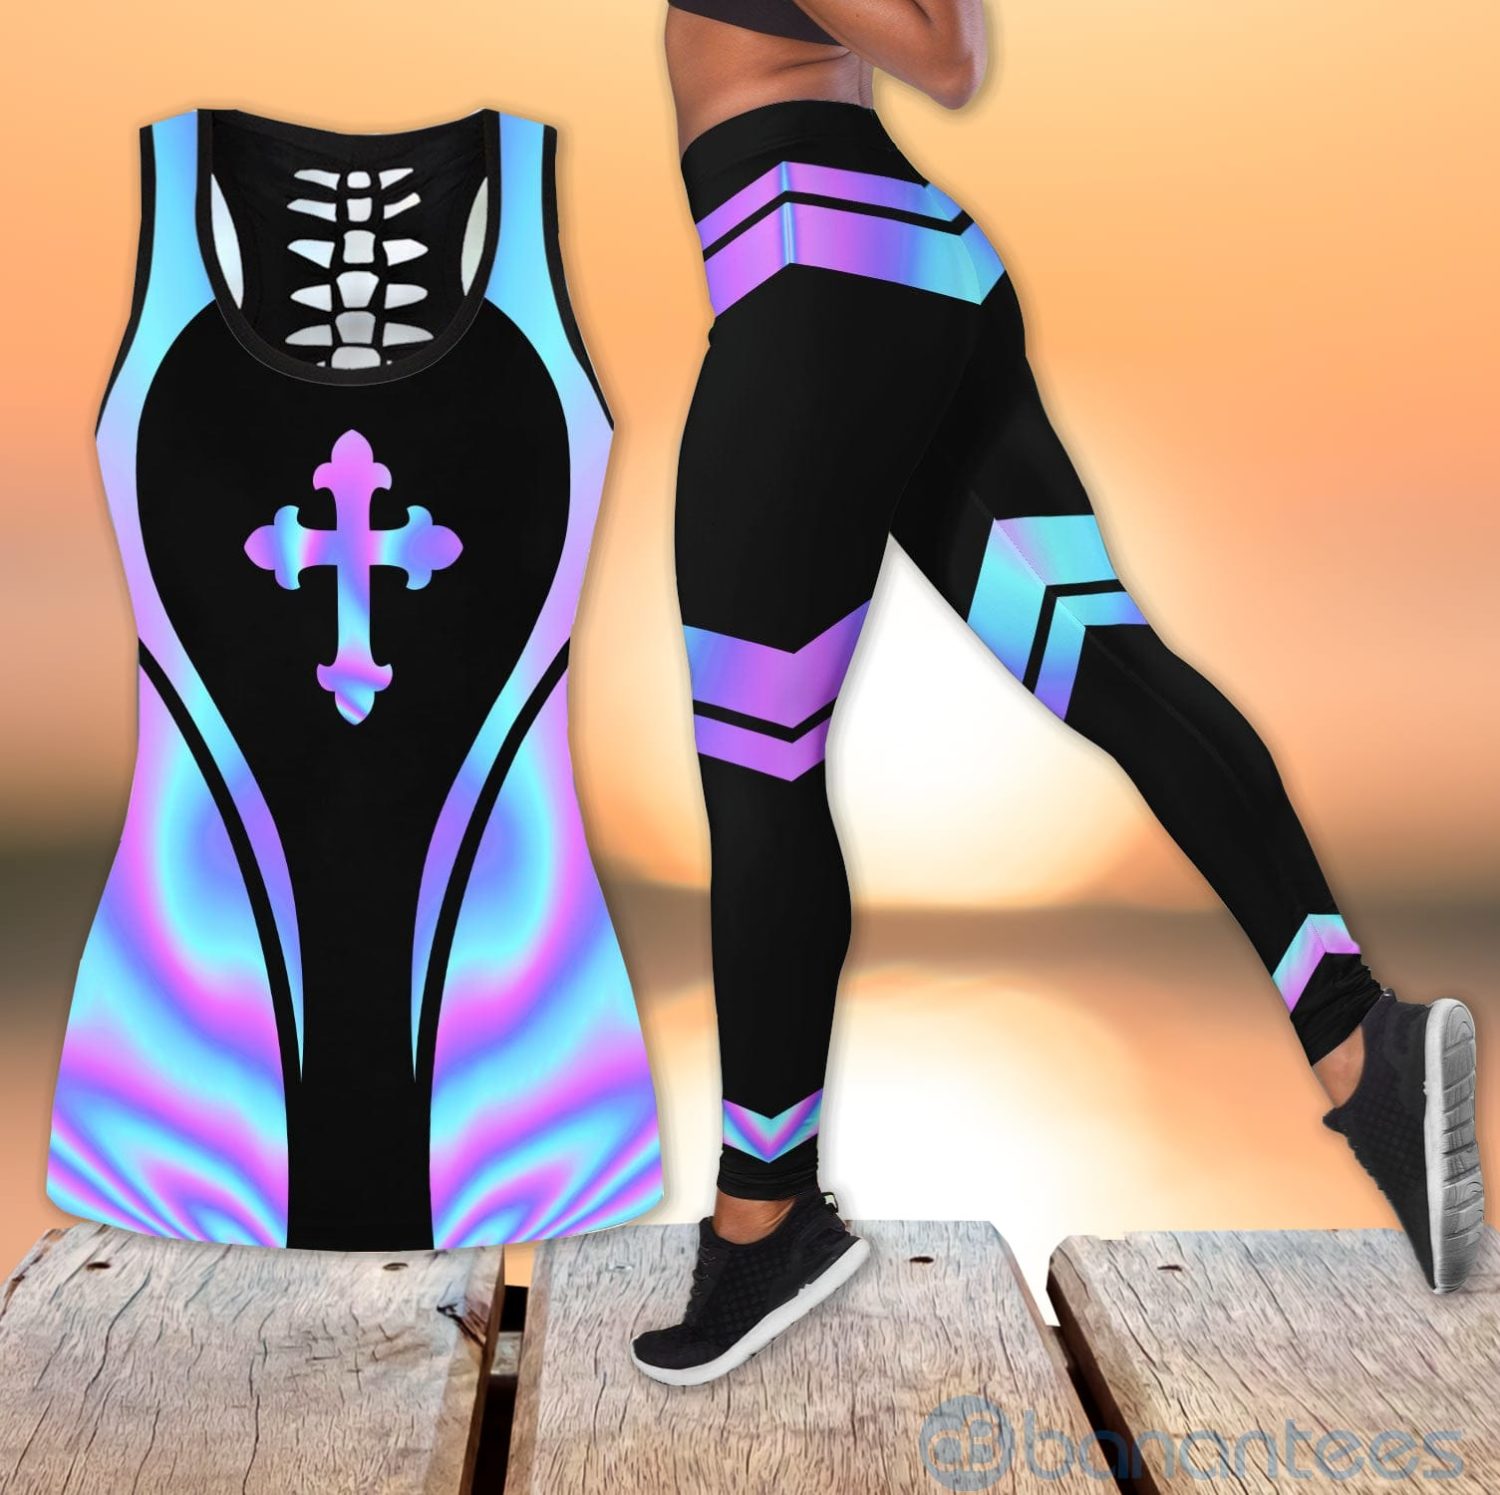 We Love Jesus Hollow Tank And Legging Outfit